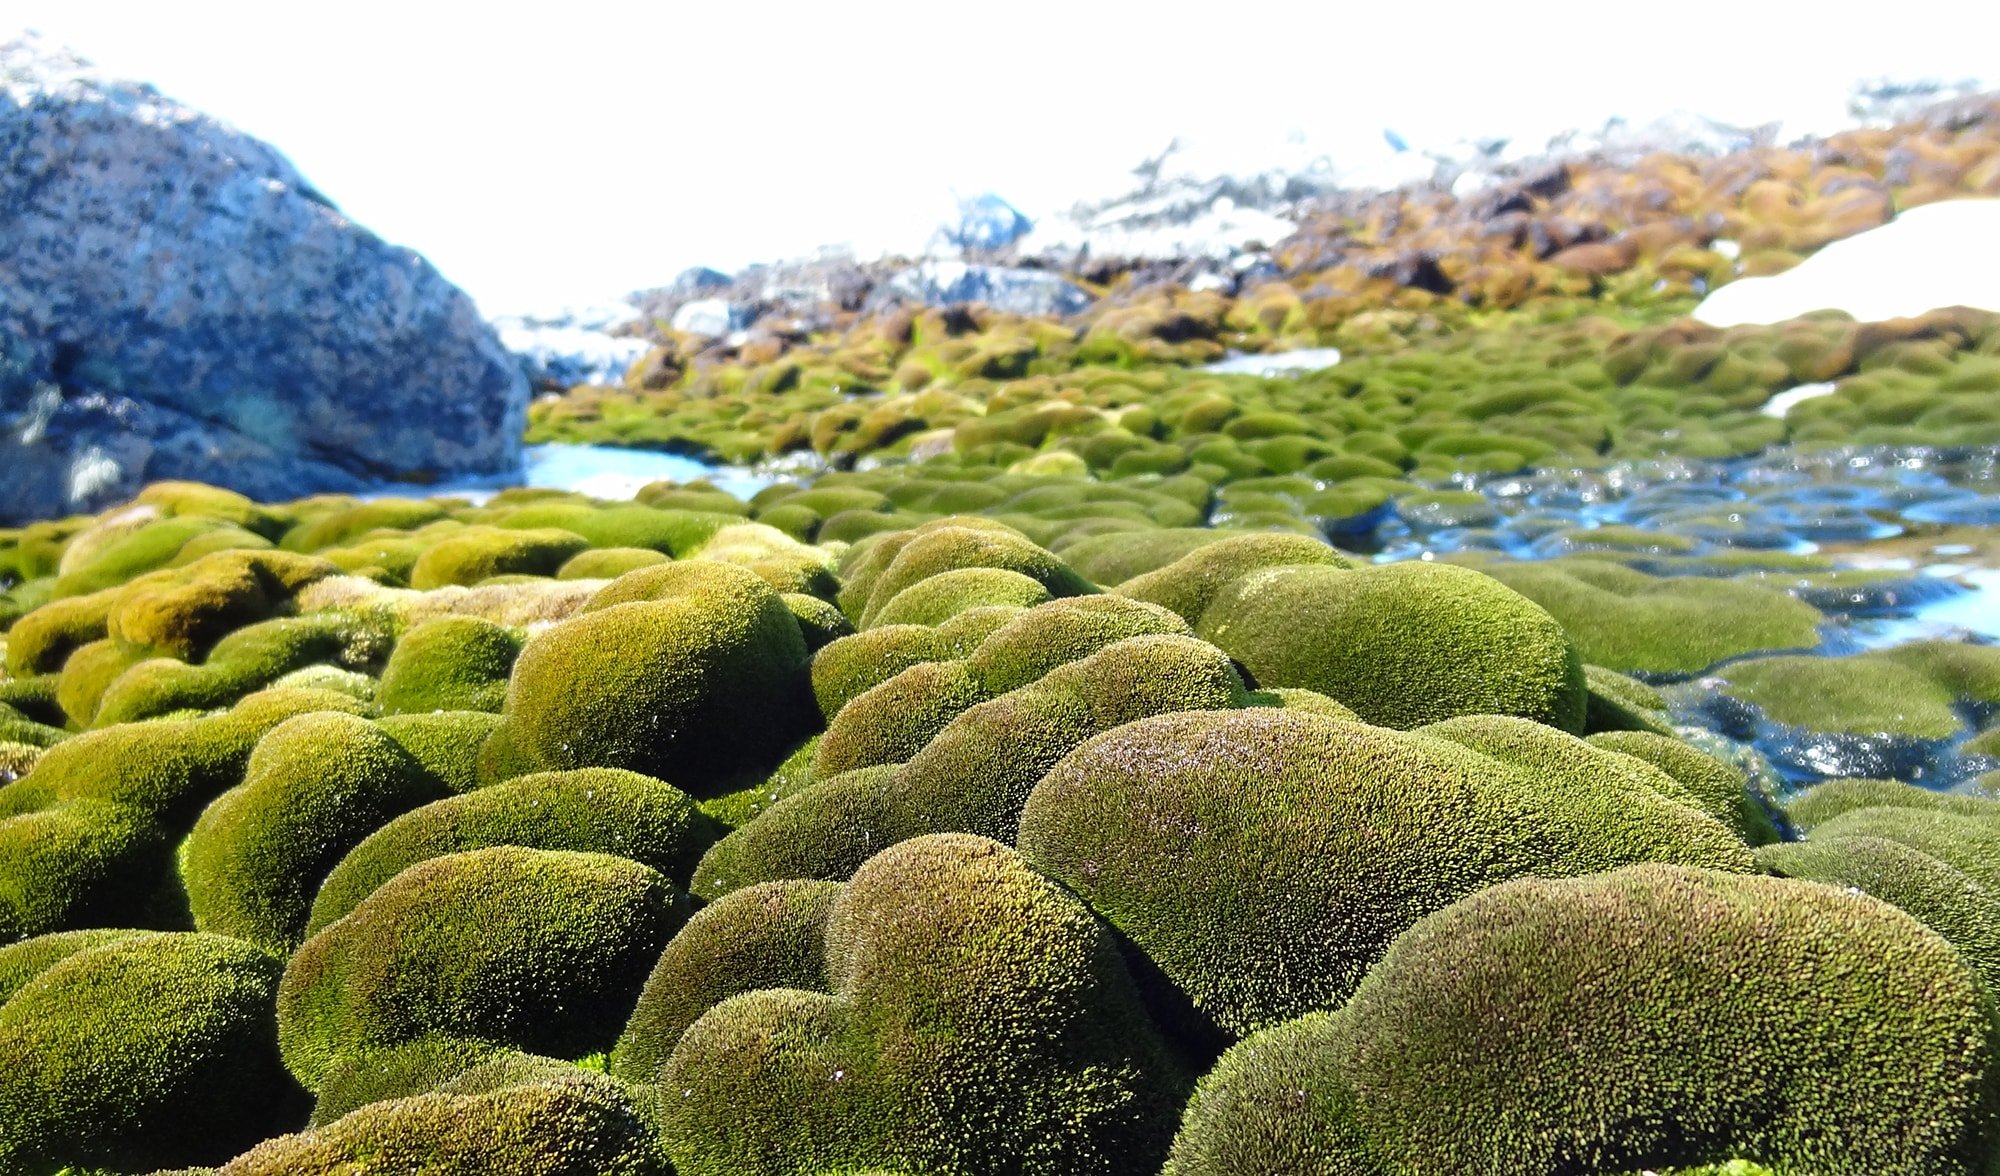 What Is Moss? The Complete Guide to Our Favorite Bryophyte